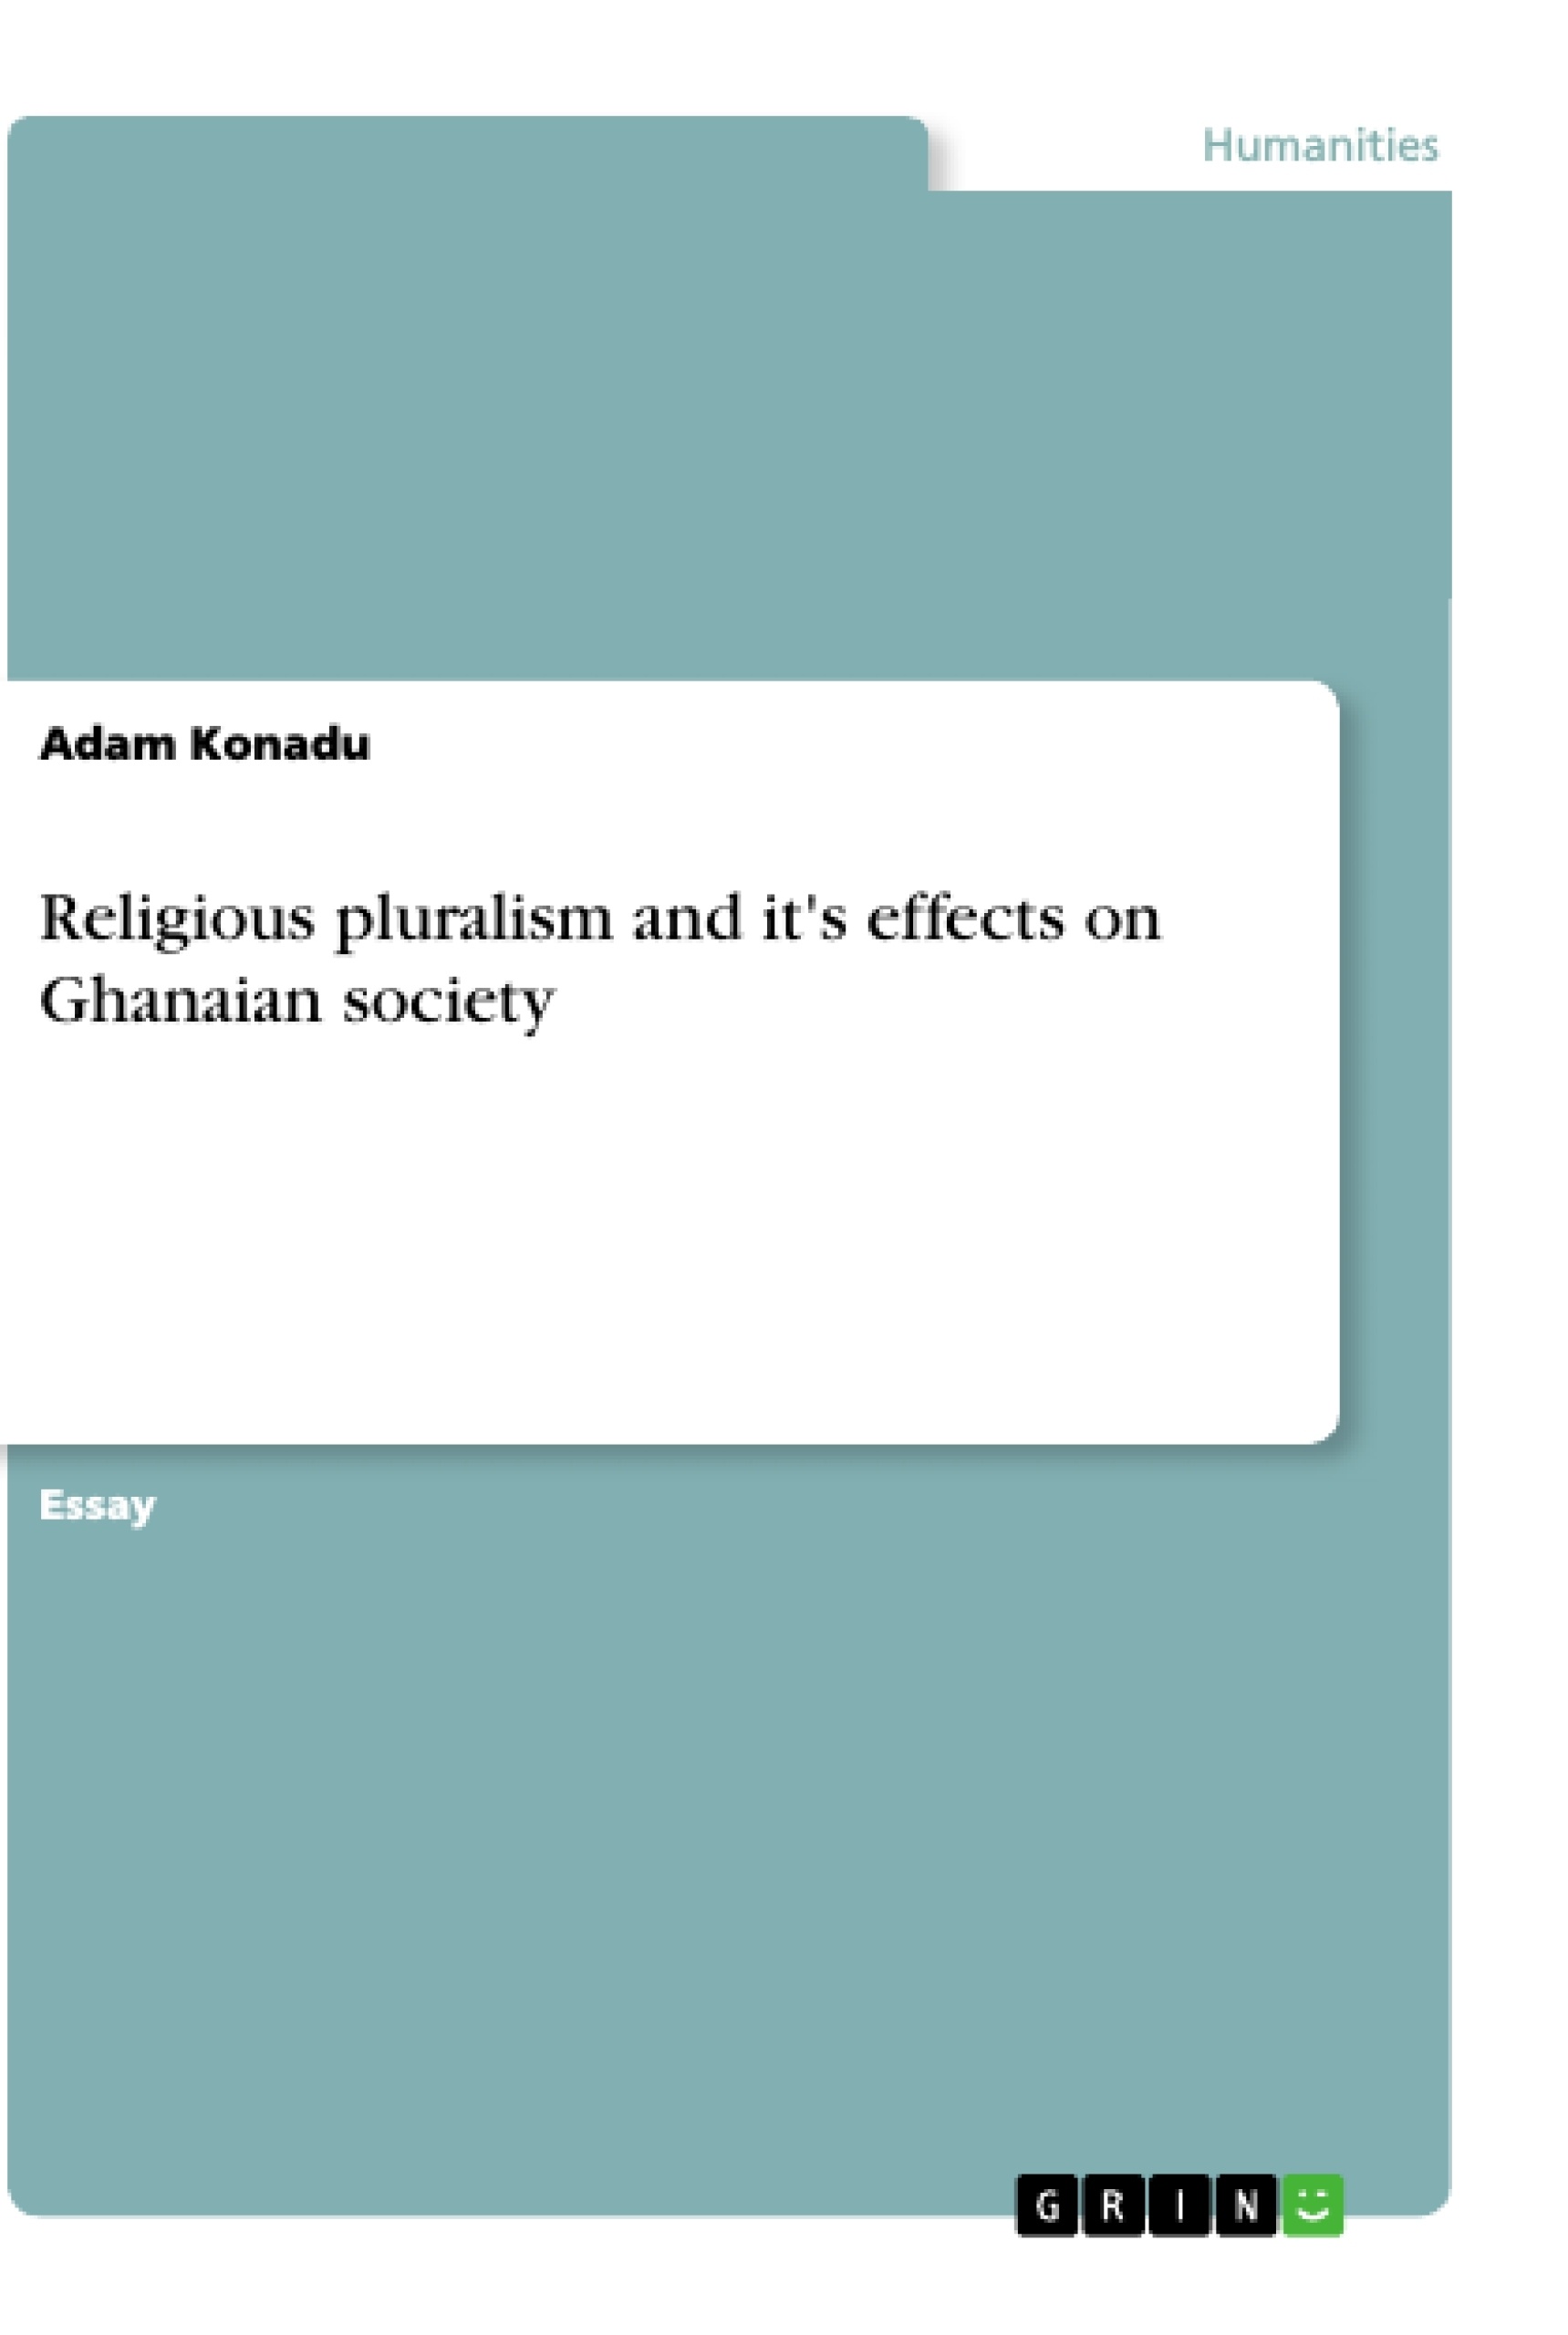 Título: Religious pluralism and it's effects on Ghanaian society